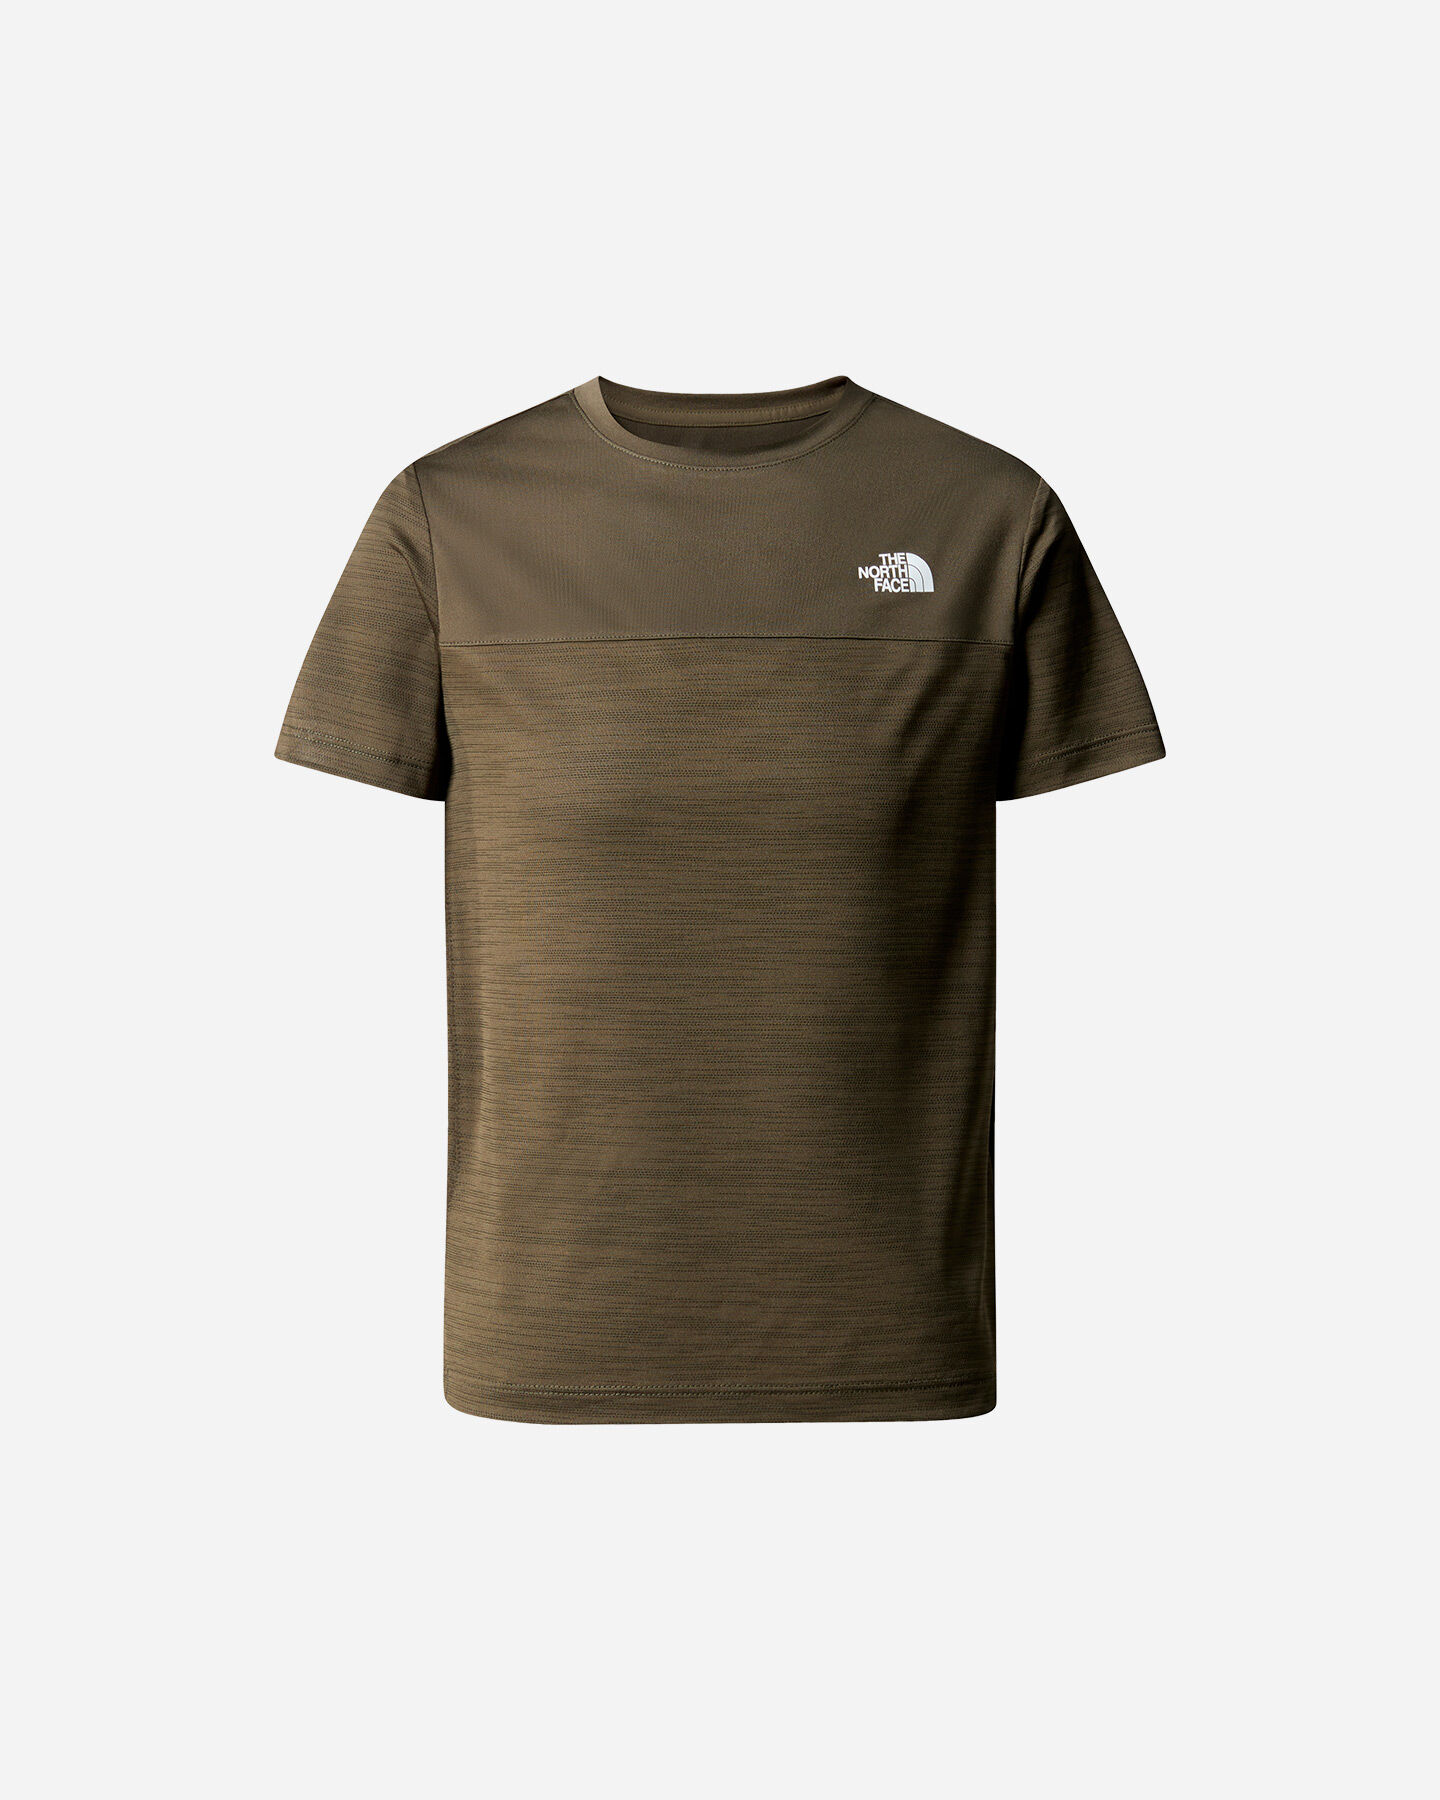  T-Shirt THE NORTH FACE NEVER STOP JR S5665662|21L|S scatto 0